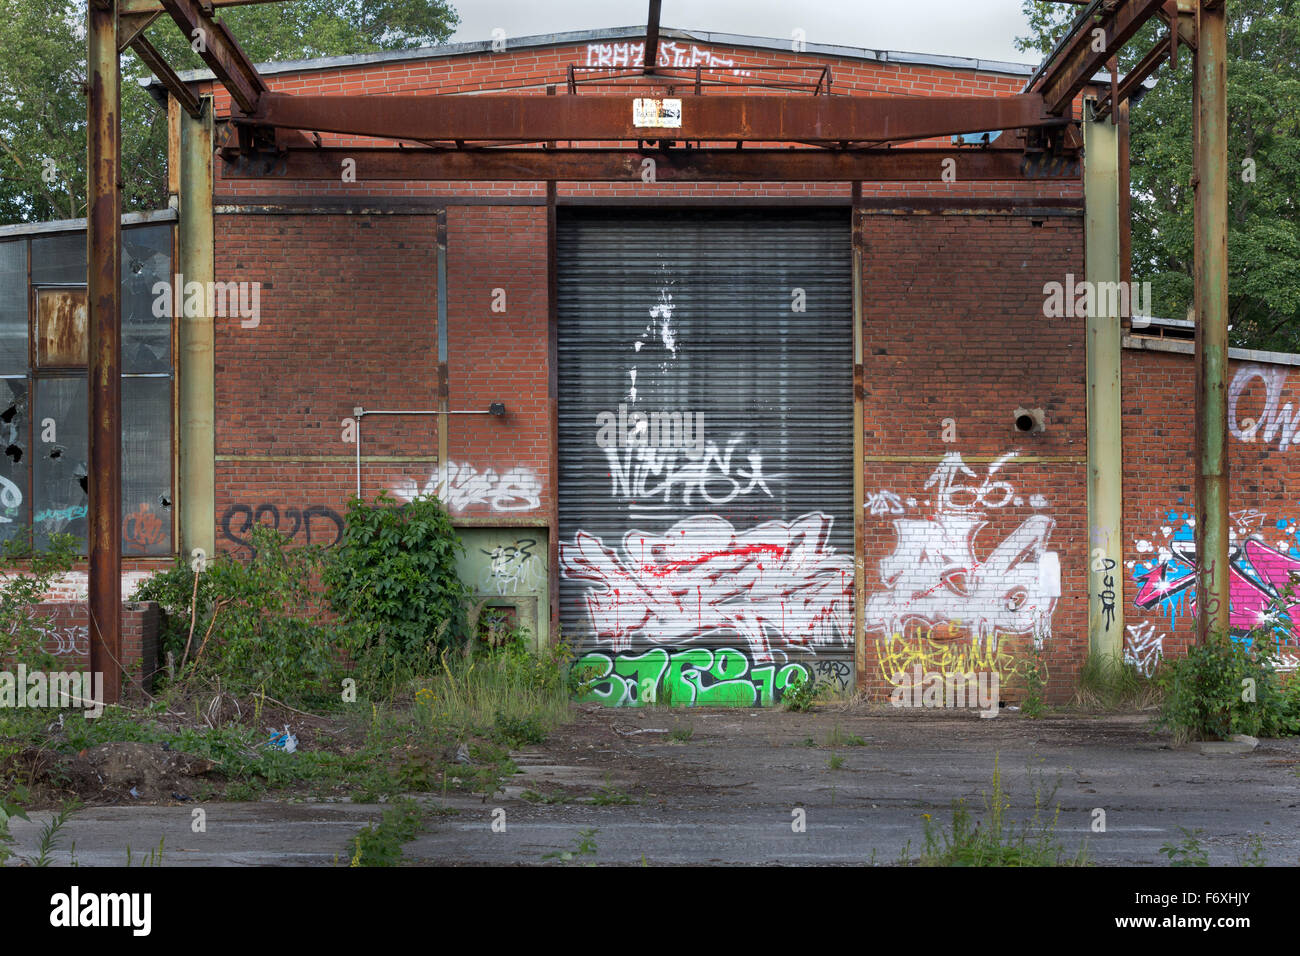 With graffiti painted wall, Schleswig Holstein, Germany Stock Photo